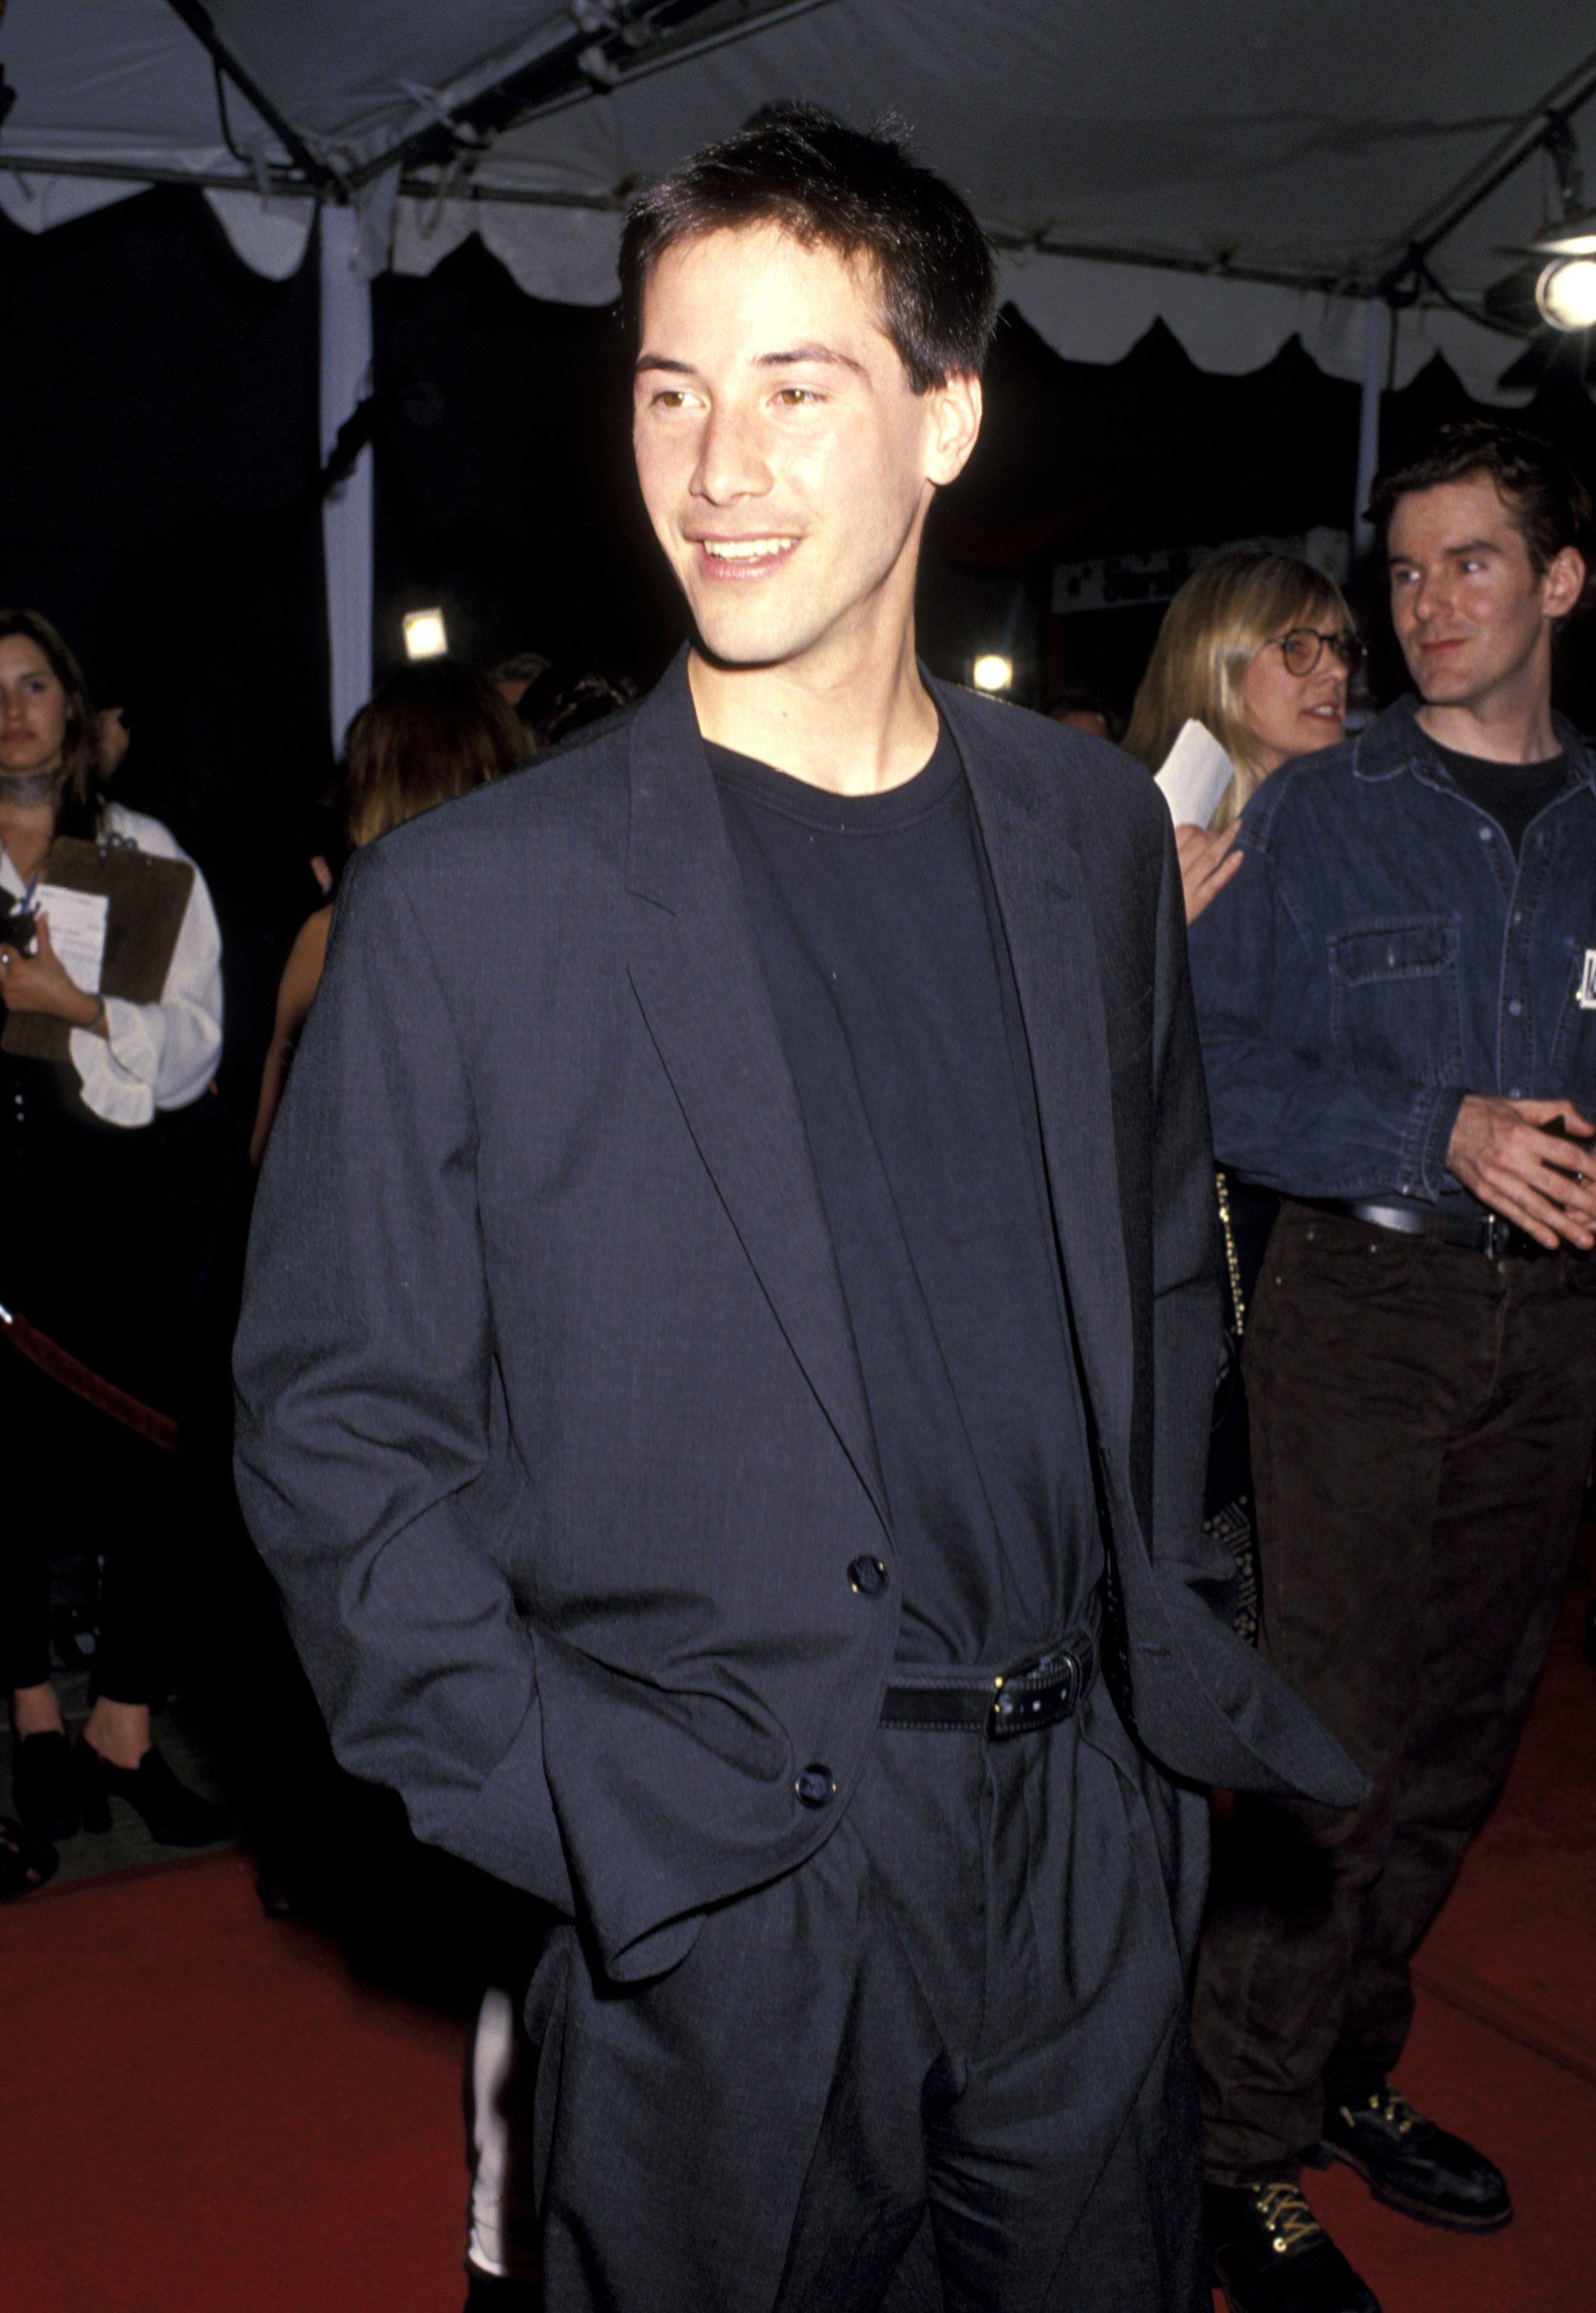 Keanu Reeves during the Los Angeles premiere of "Speed" at Mann's Chinese Theater in Hollywood, California | Source: Getty Images)